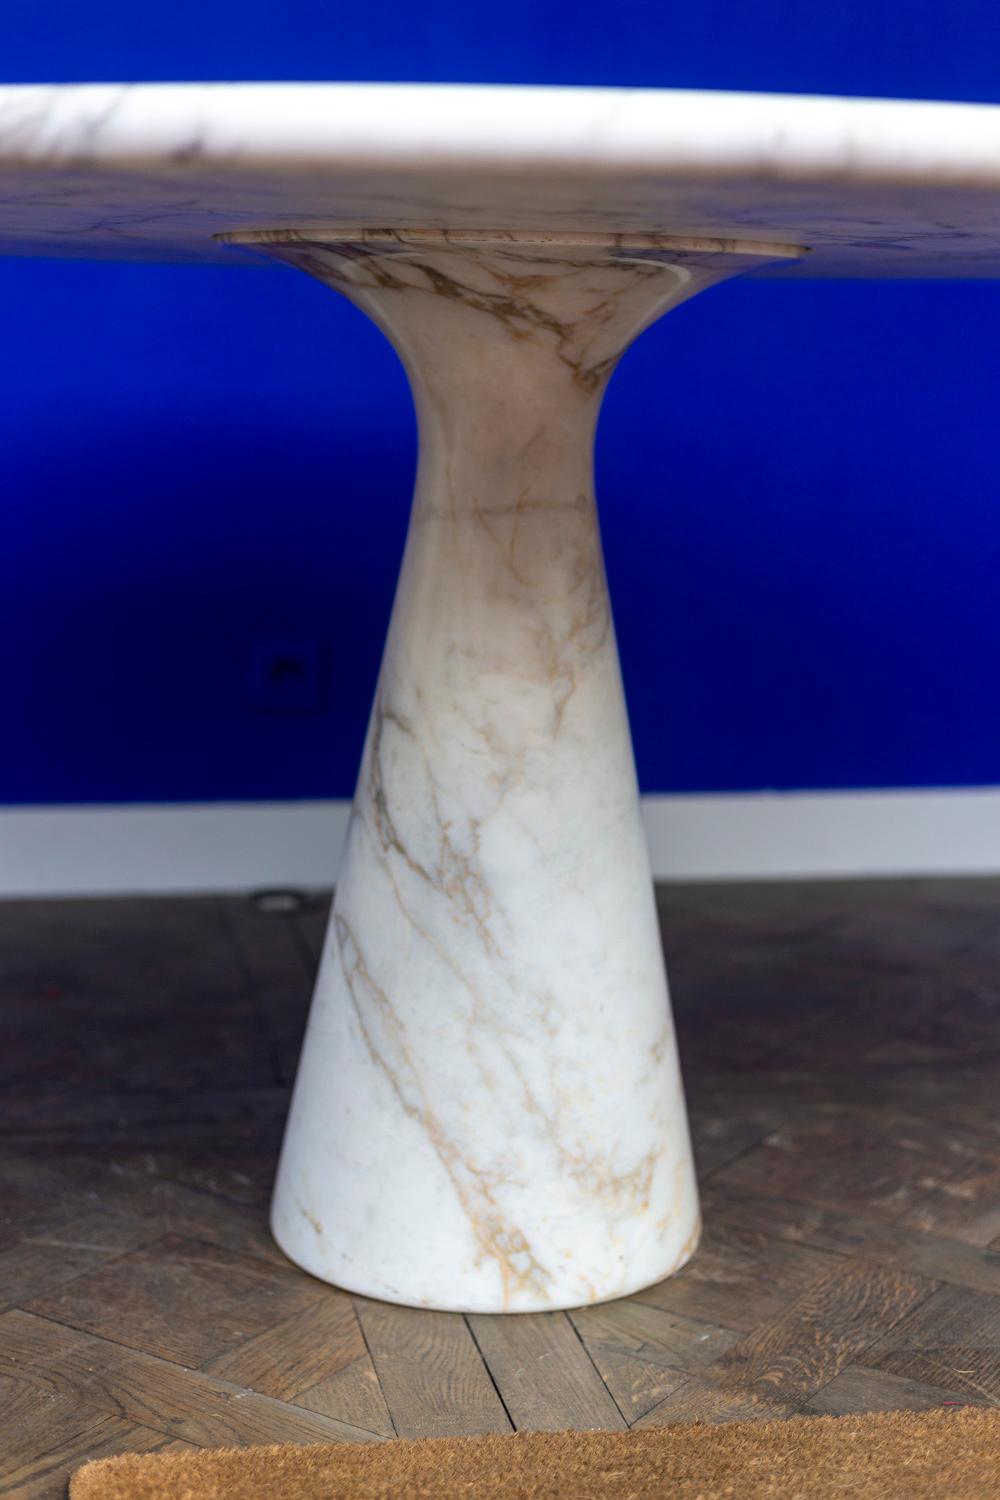 Angelo Mangiarotti, attributed to.
Skipper, edited by. 

Table, or pedestal table, in white marble. Round shaped top standing on a conical foot.

Italian work realized in the 1970s. 

Dimensions : H 72,5 x D 128 cm. 
 

Angelo Mangiarotti